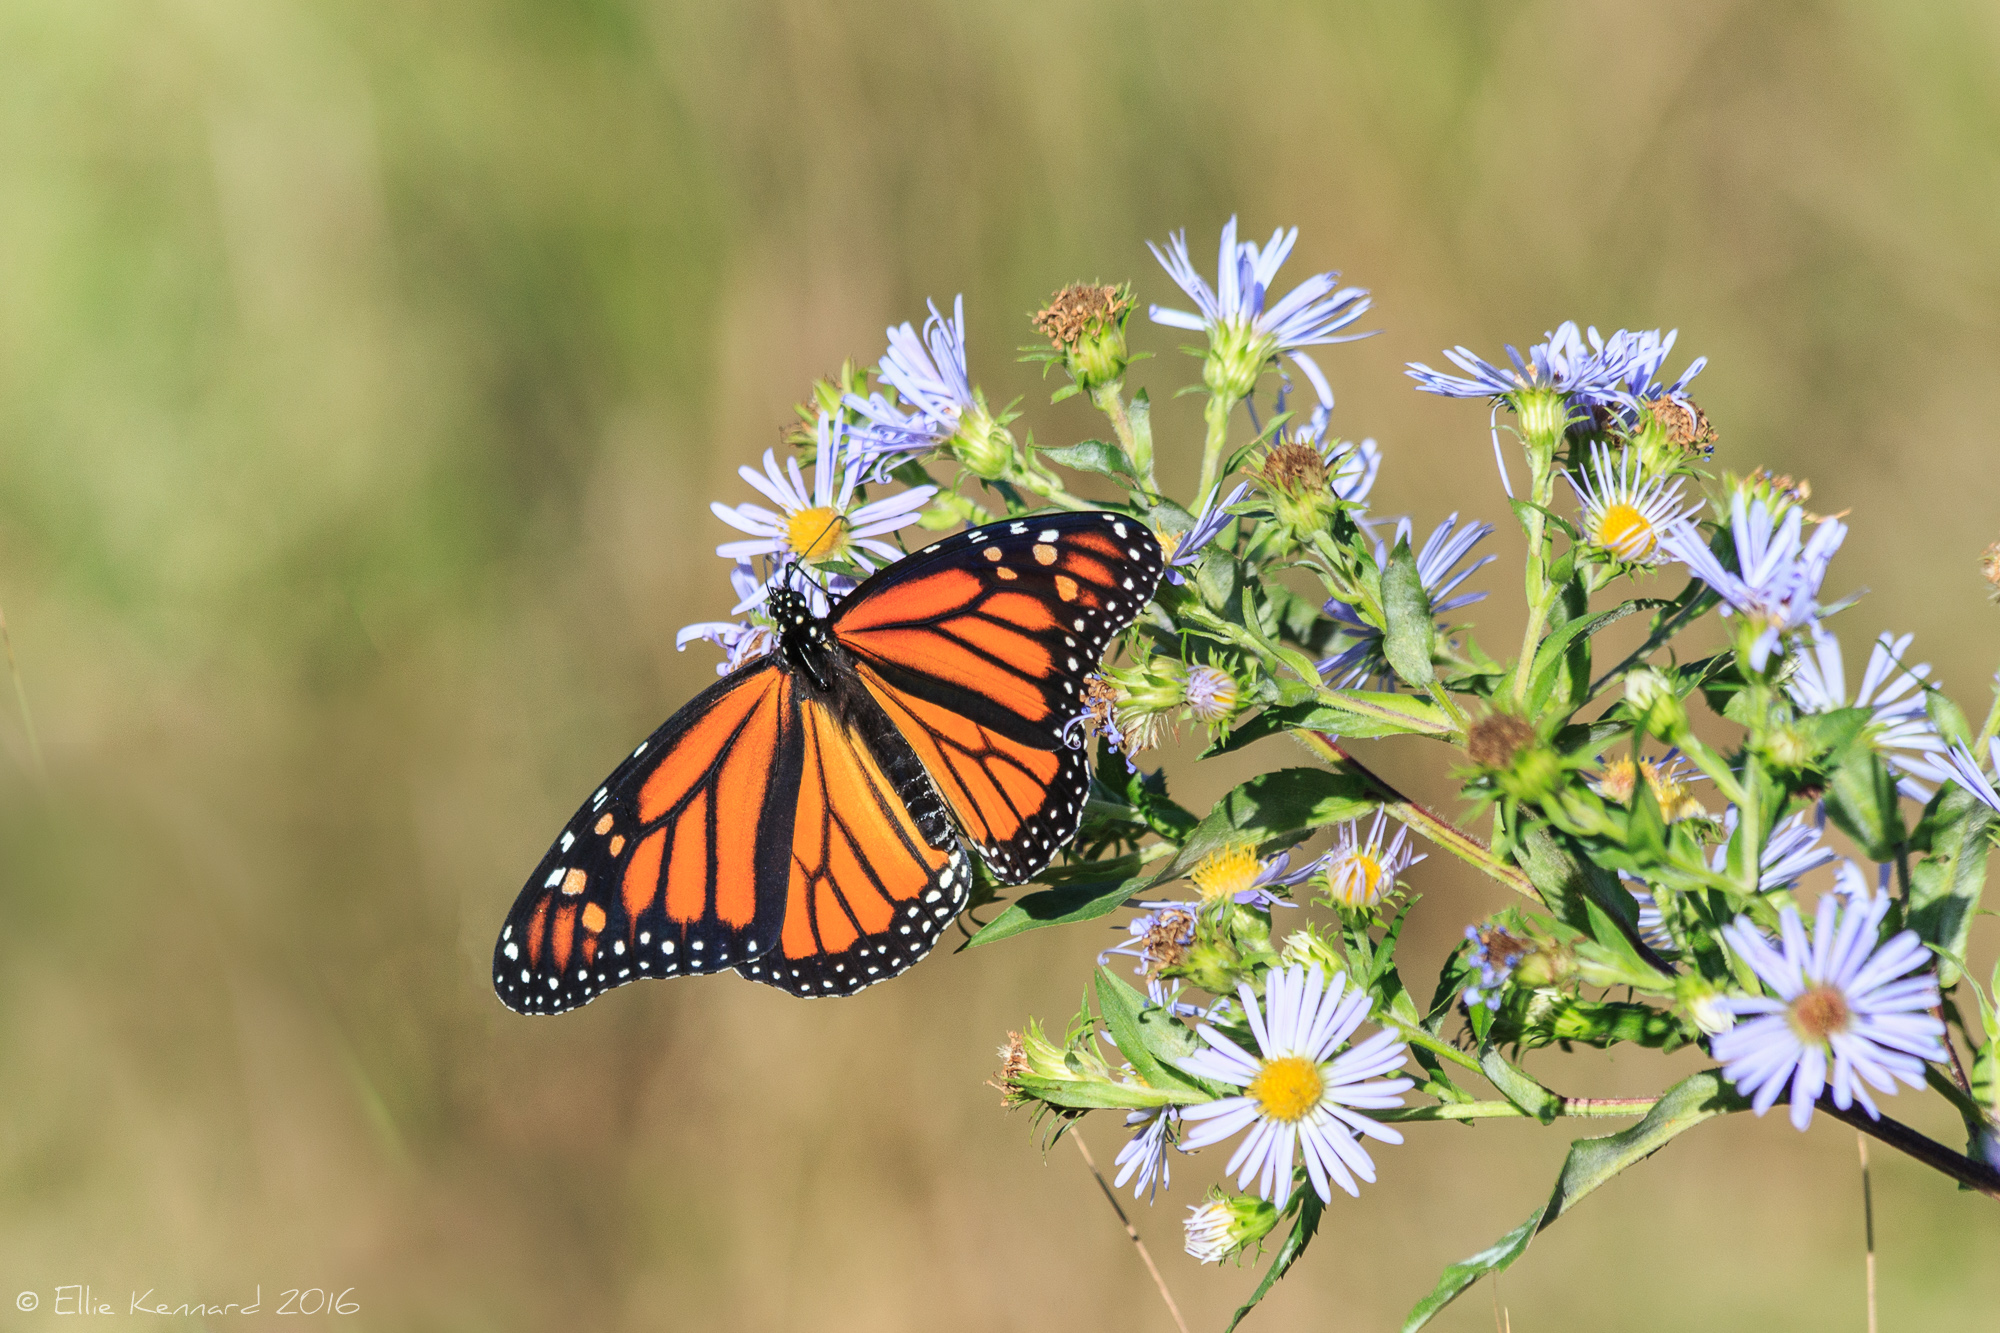 Female Monarch Butterfly on wildflowers, Canning, NS. Note the lack of black spot on the wing and the thicker lines traced on the wings. - Ellie Kennard 2016